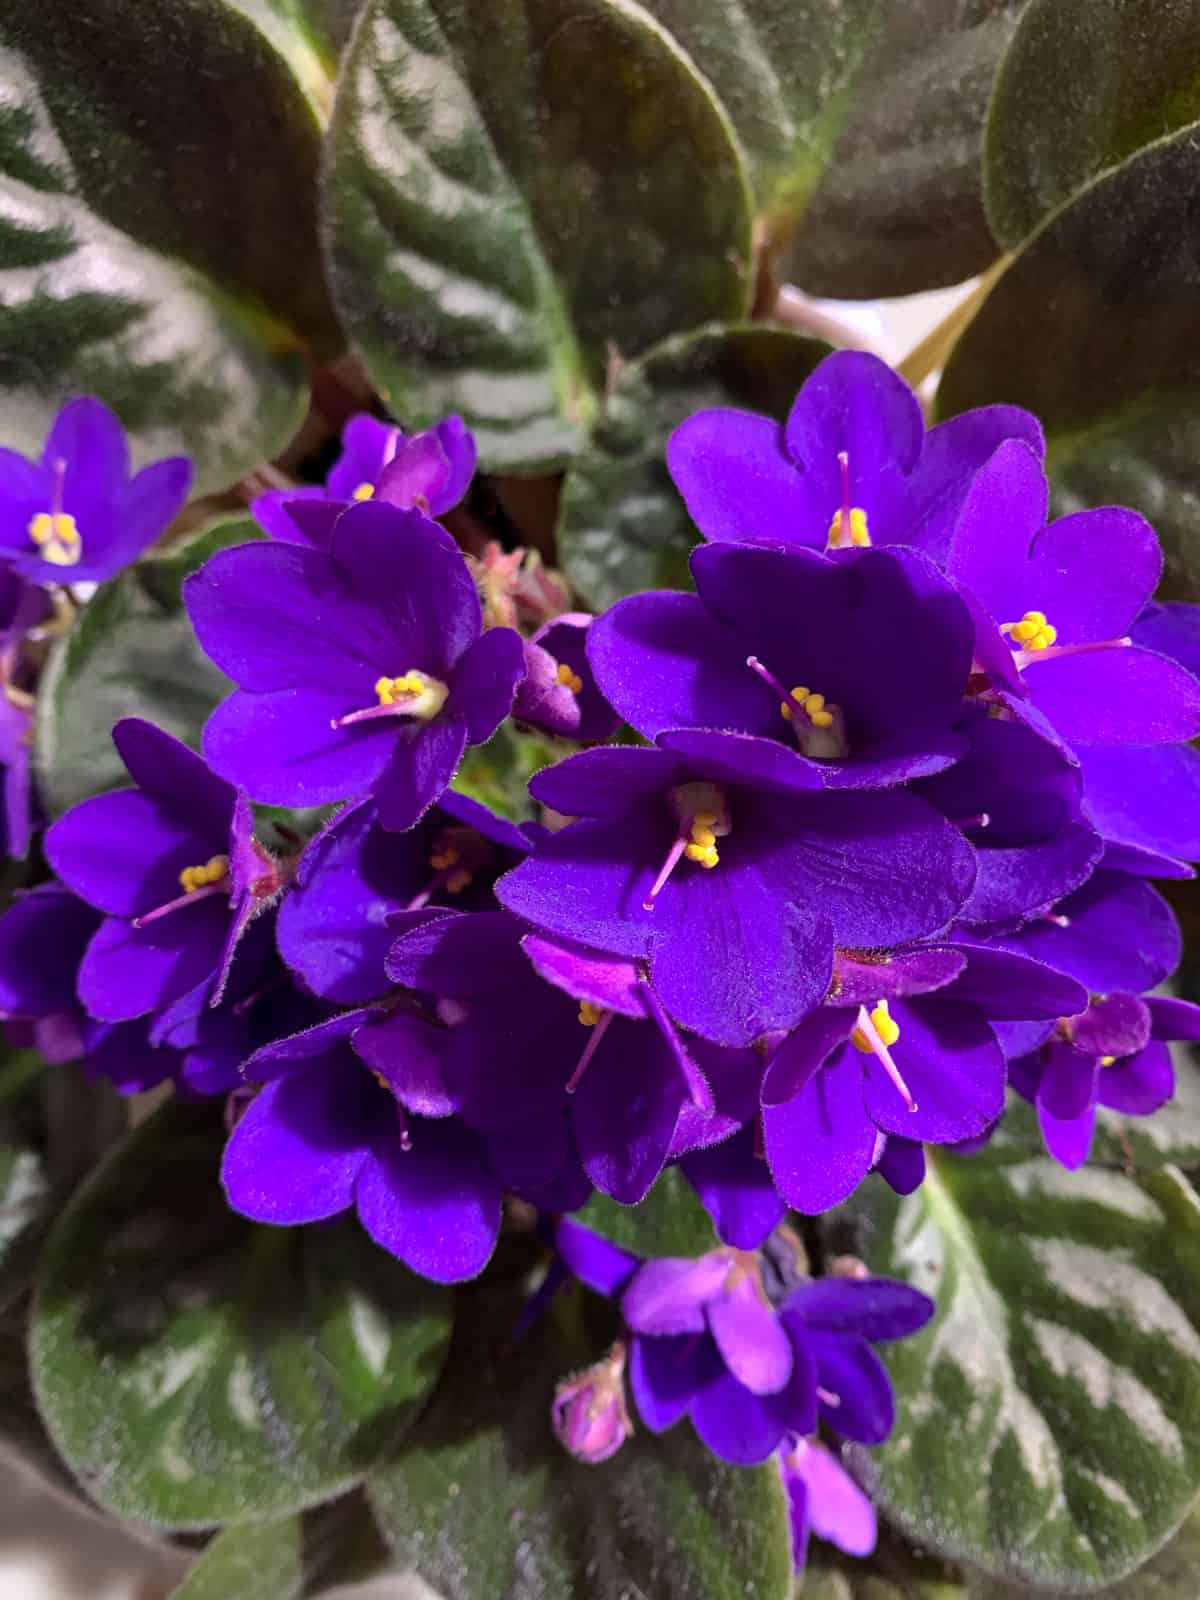 Gorgeous deep purple flowers of an African Violet plant